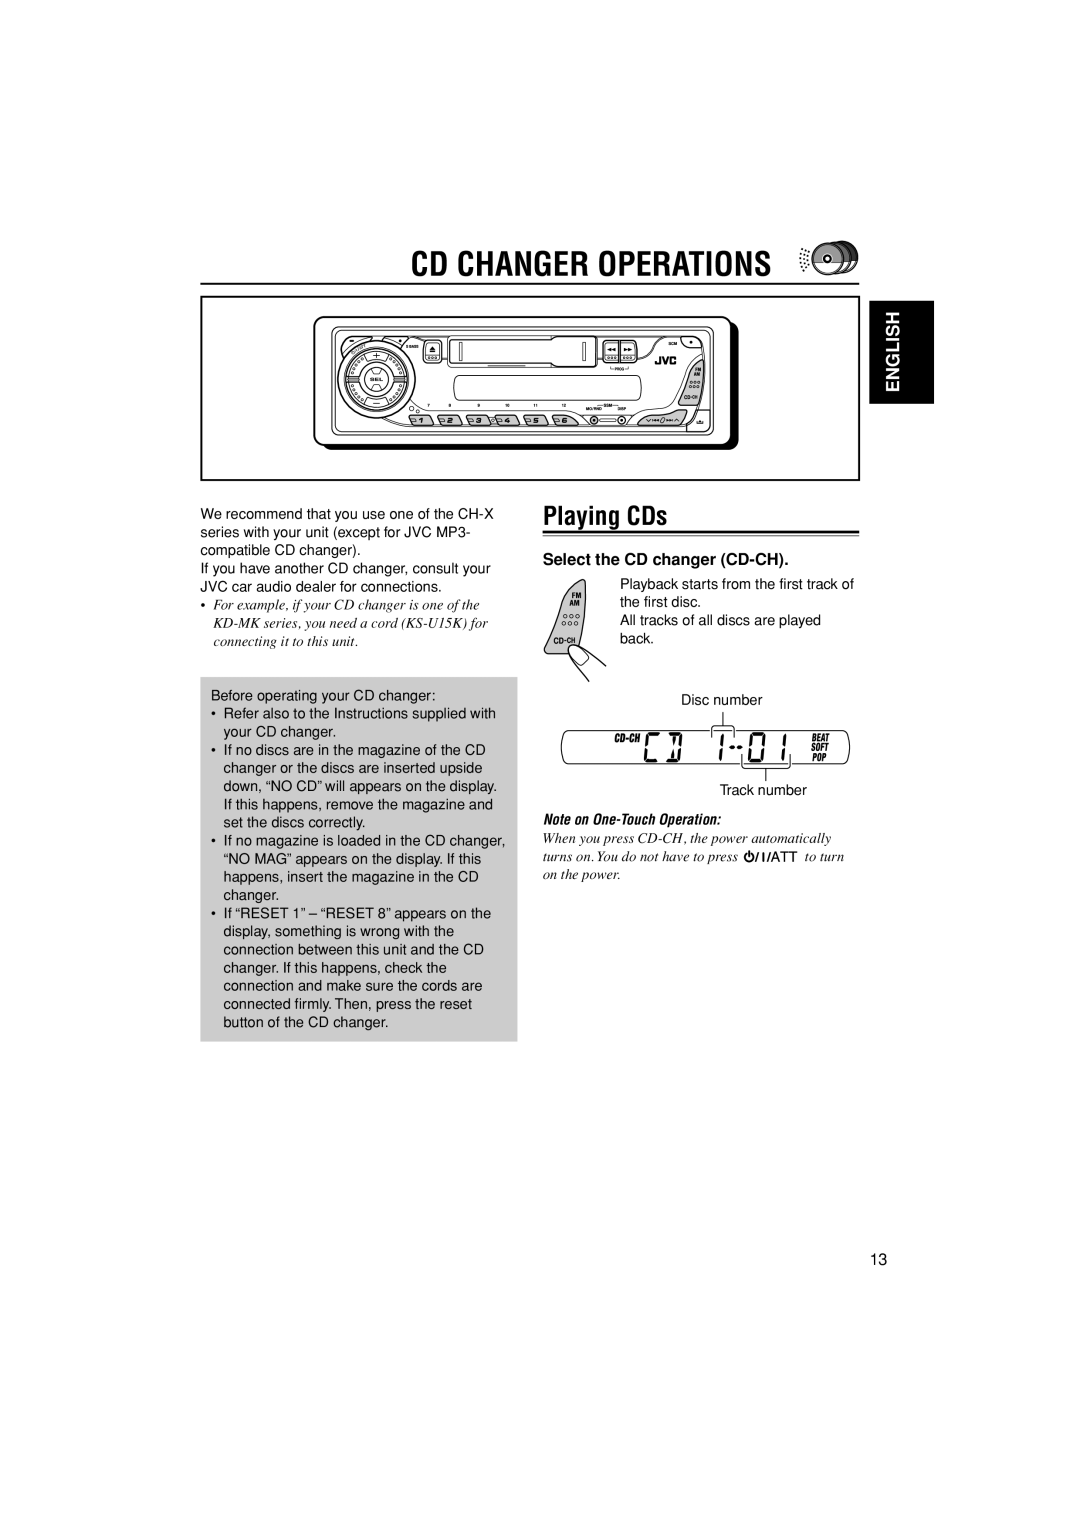 JVC KS-FX385 manual Cd Changer Operations, Playing CDs, English, Select the CD changer CD-CH, Note on One-Touch Operation 